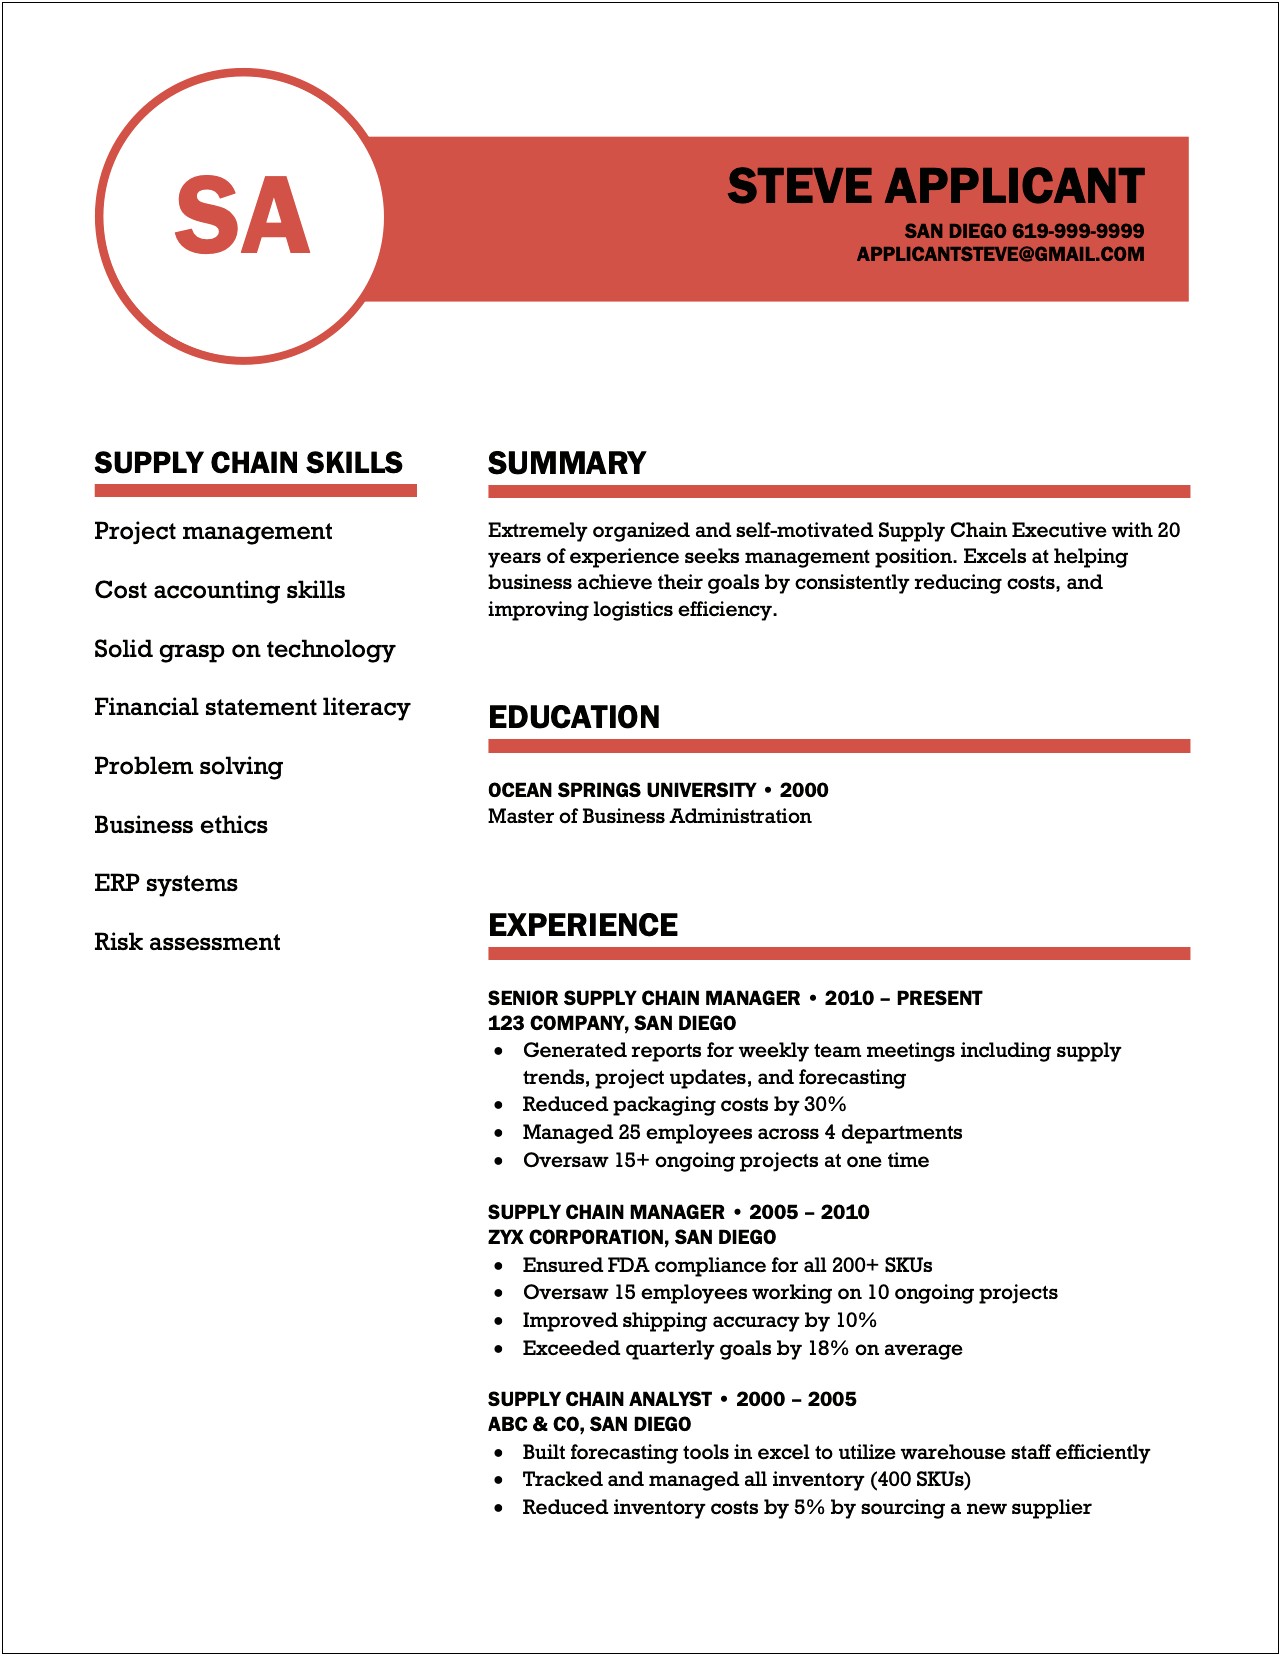 Best Supply Chain Executive Resume